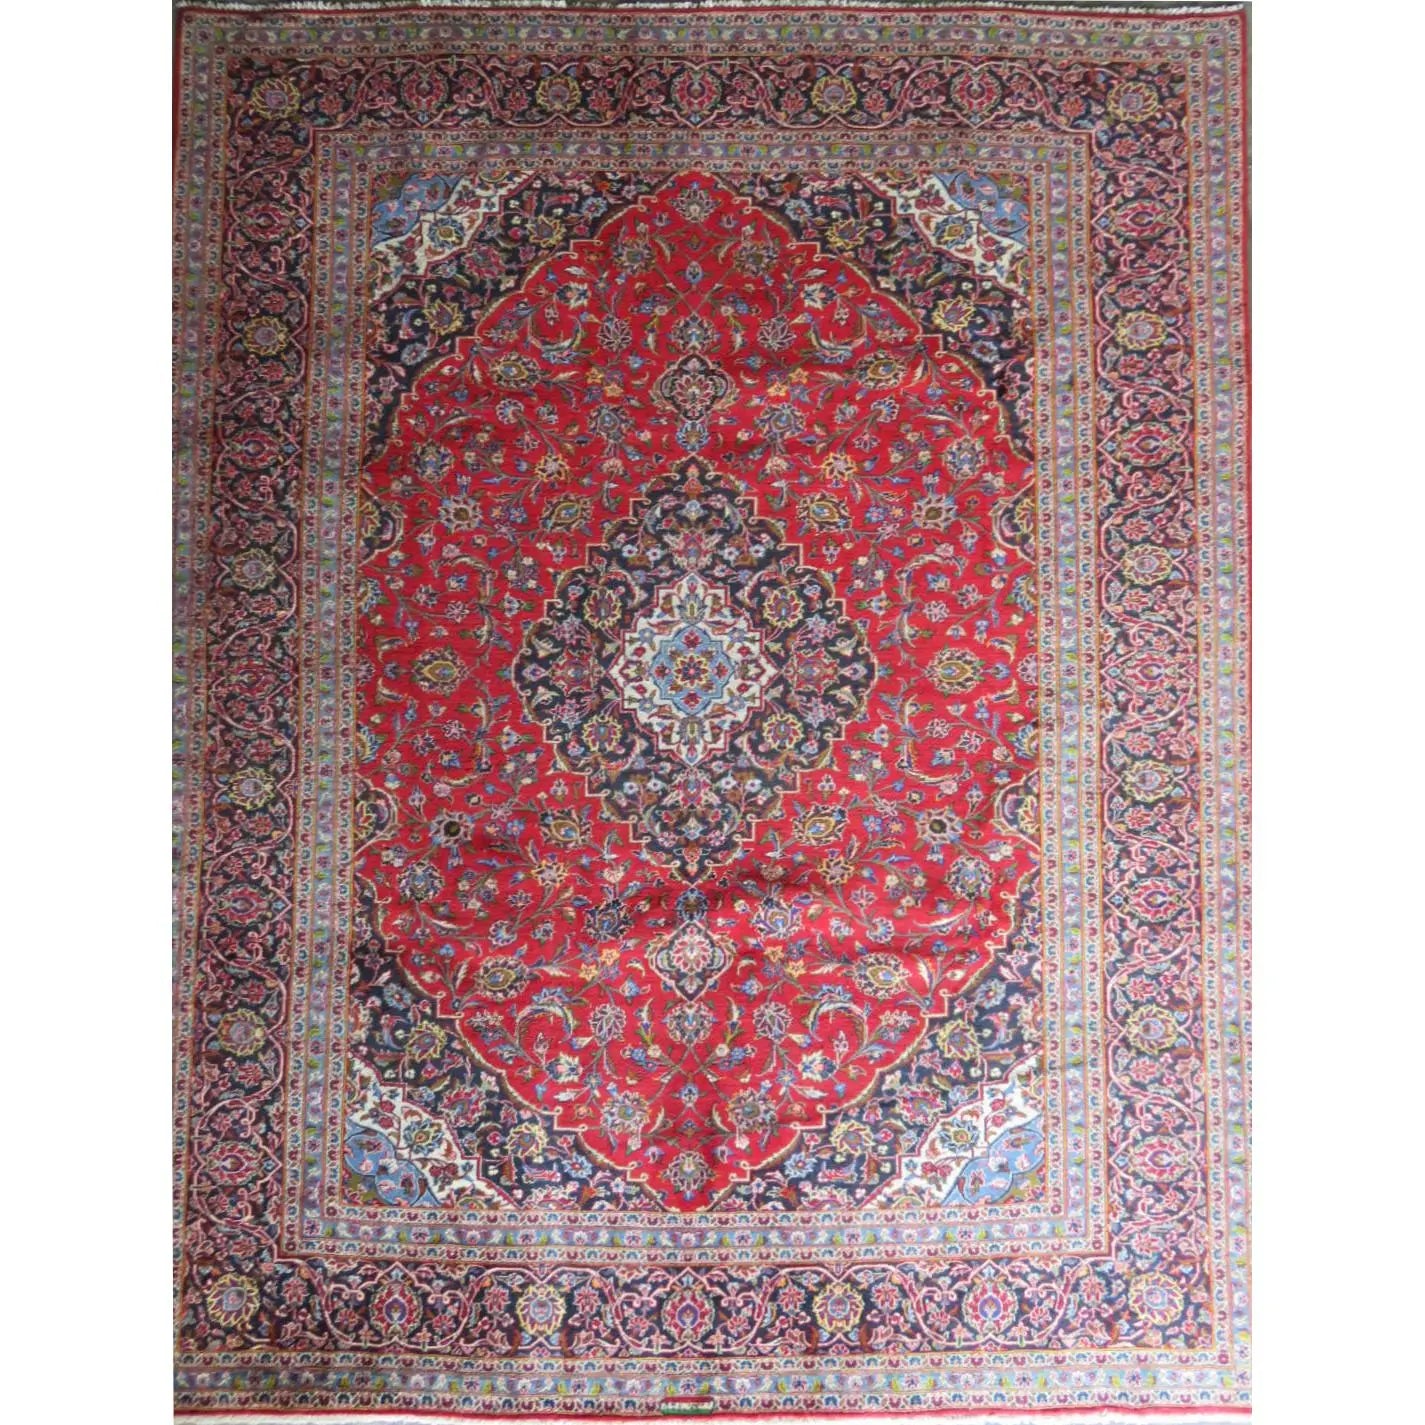 Hand-Knotted Vintage Rug 12'6" x 9'9"